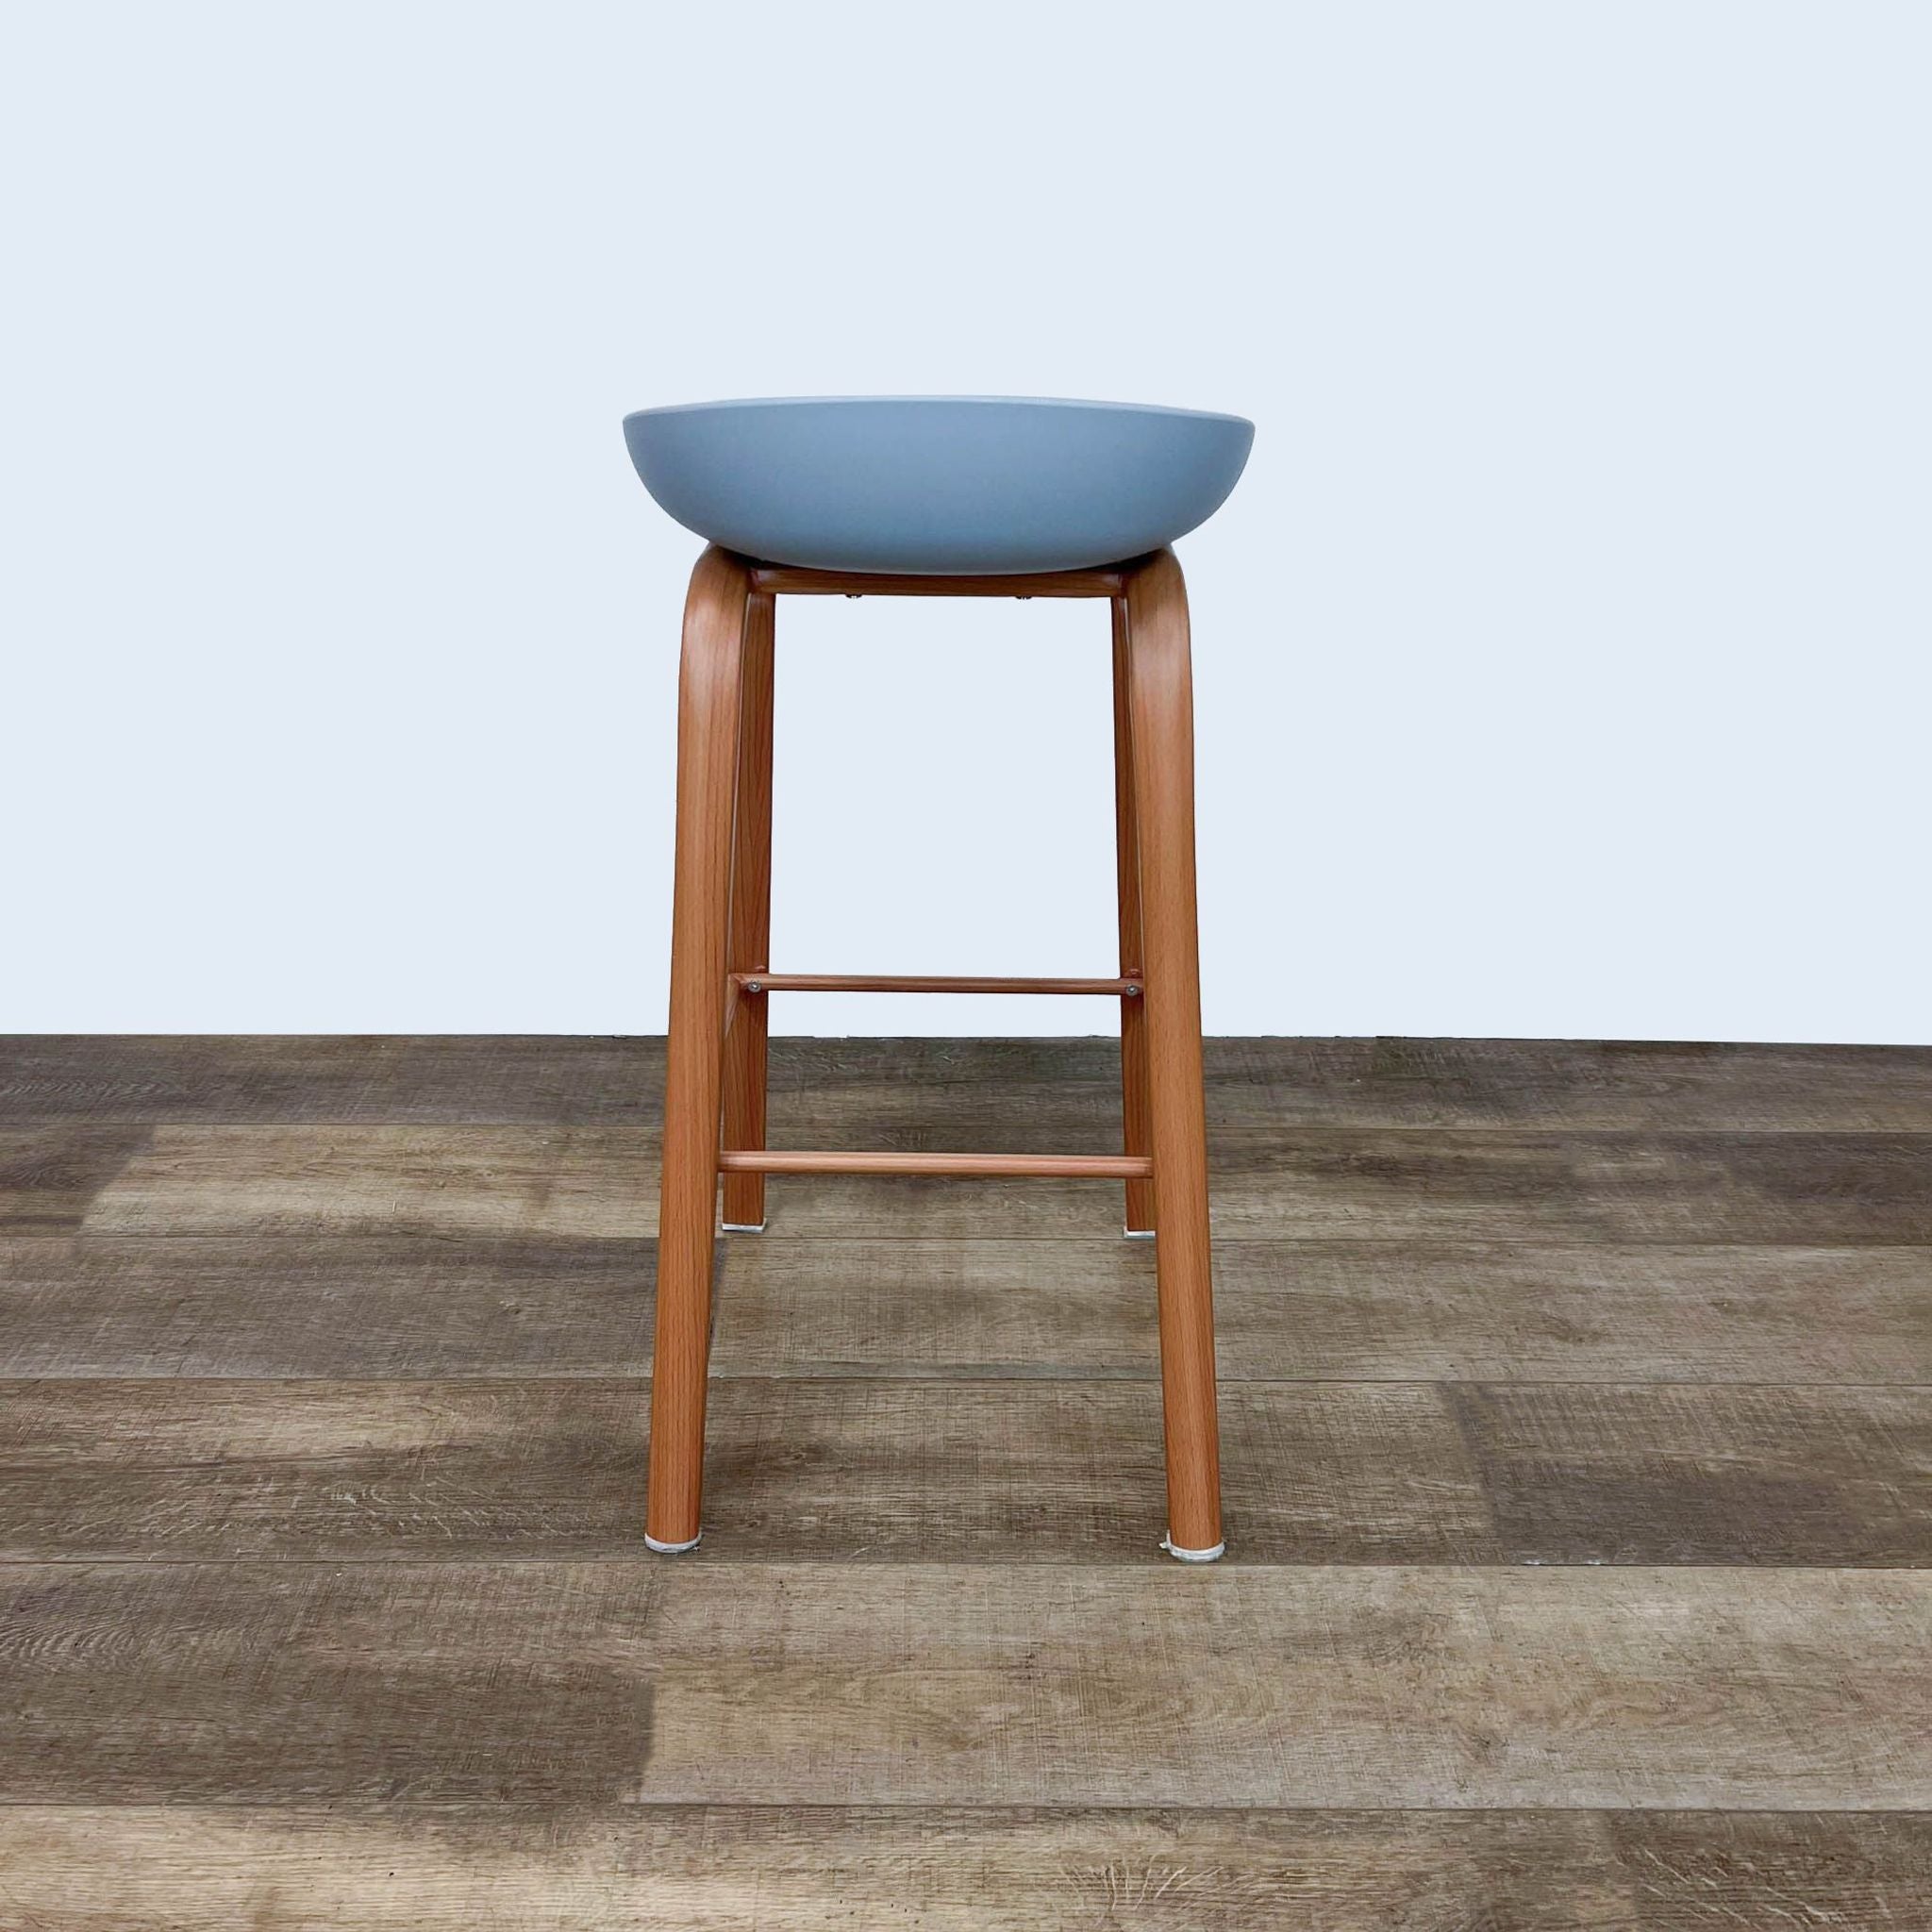 Gray Reperch barstool with plastic seat and wooden frame, on wooden floor.